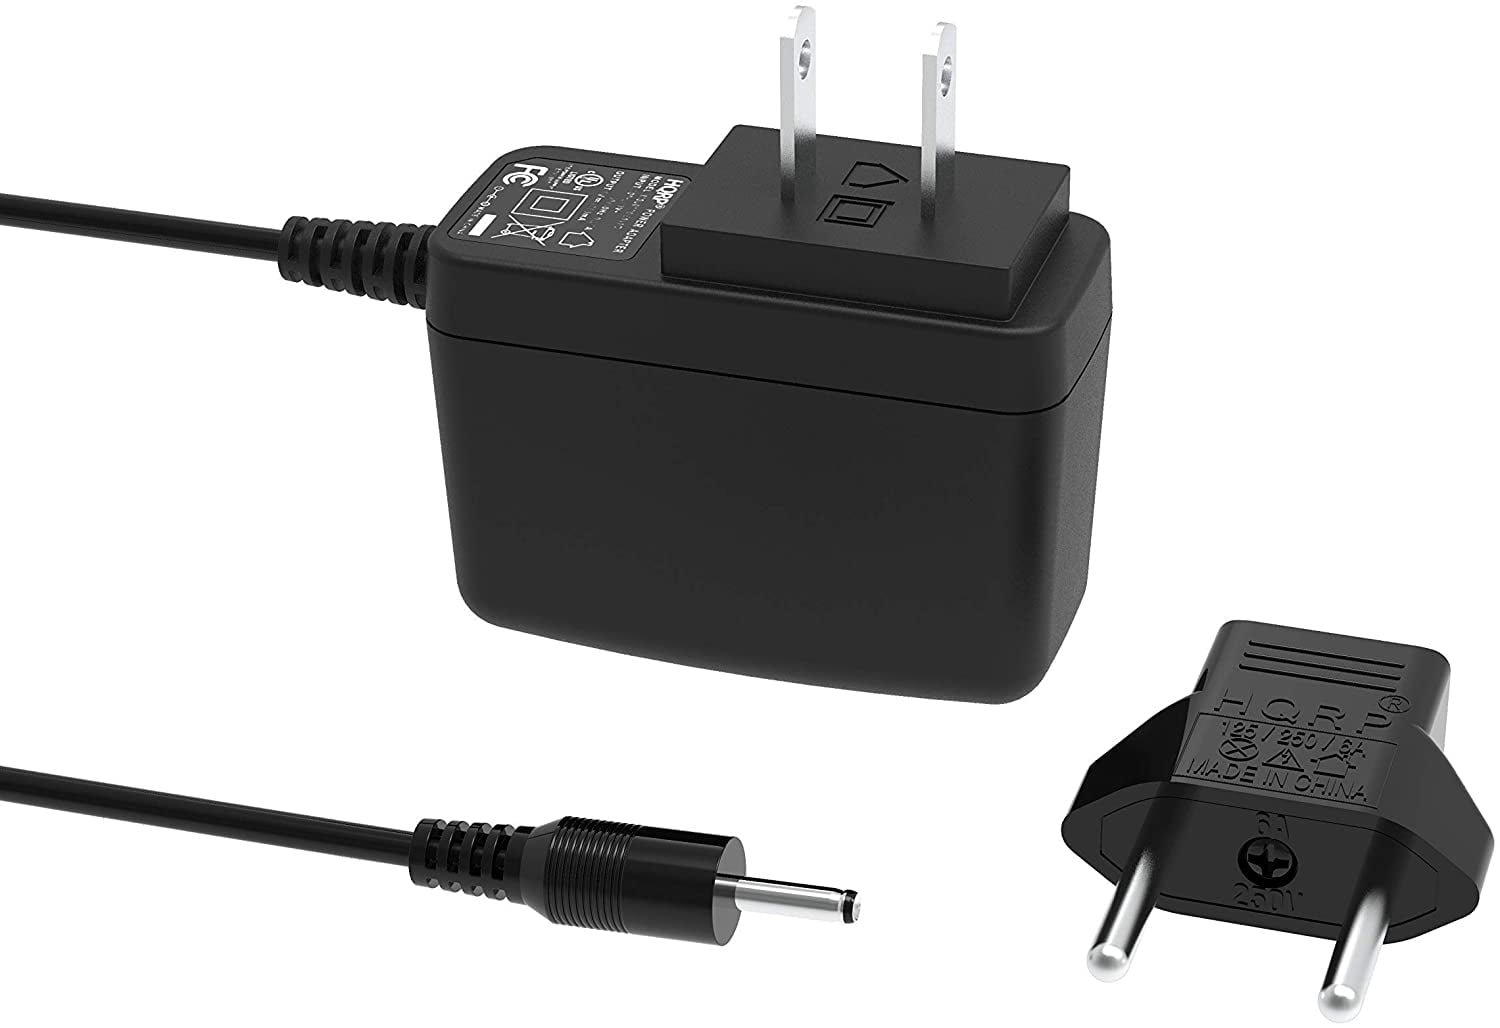 HQRP 4.2V AC Adapter for Wahl S003HU0420060 97581-405 9854L 97581-1105  GMA042060US S004MU0400090 Rhd10w060100 Trimmer Charger Power Supply Cord +  HQRP Euro Plug Adapter 